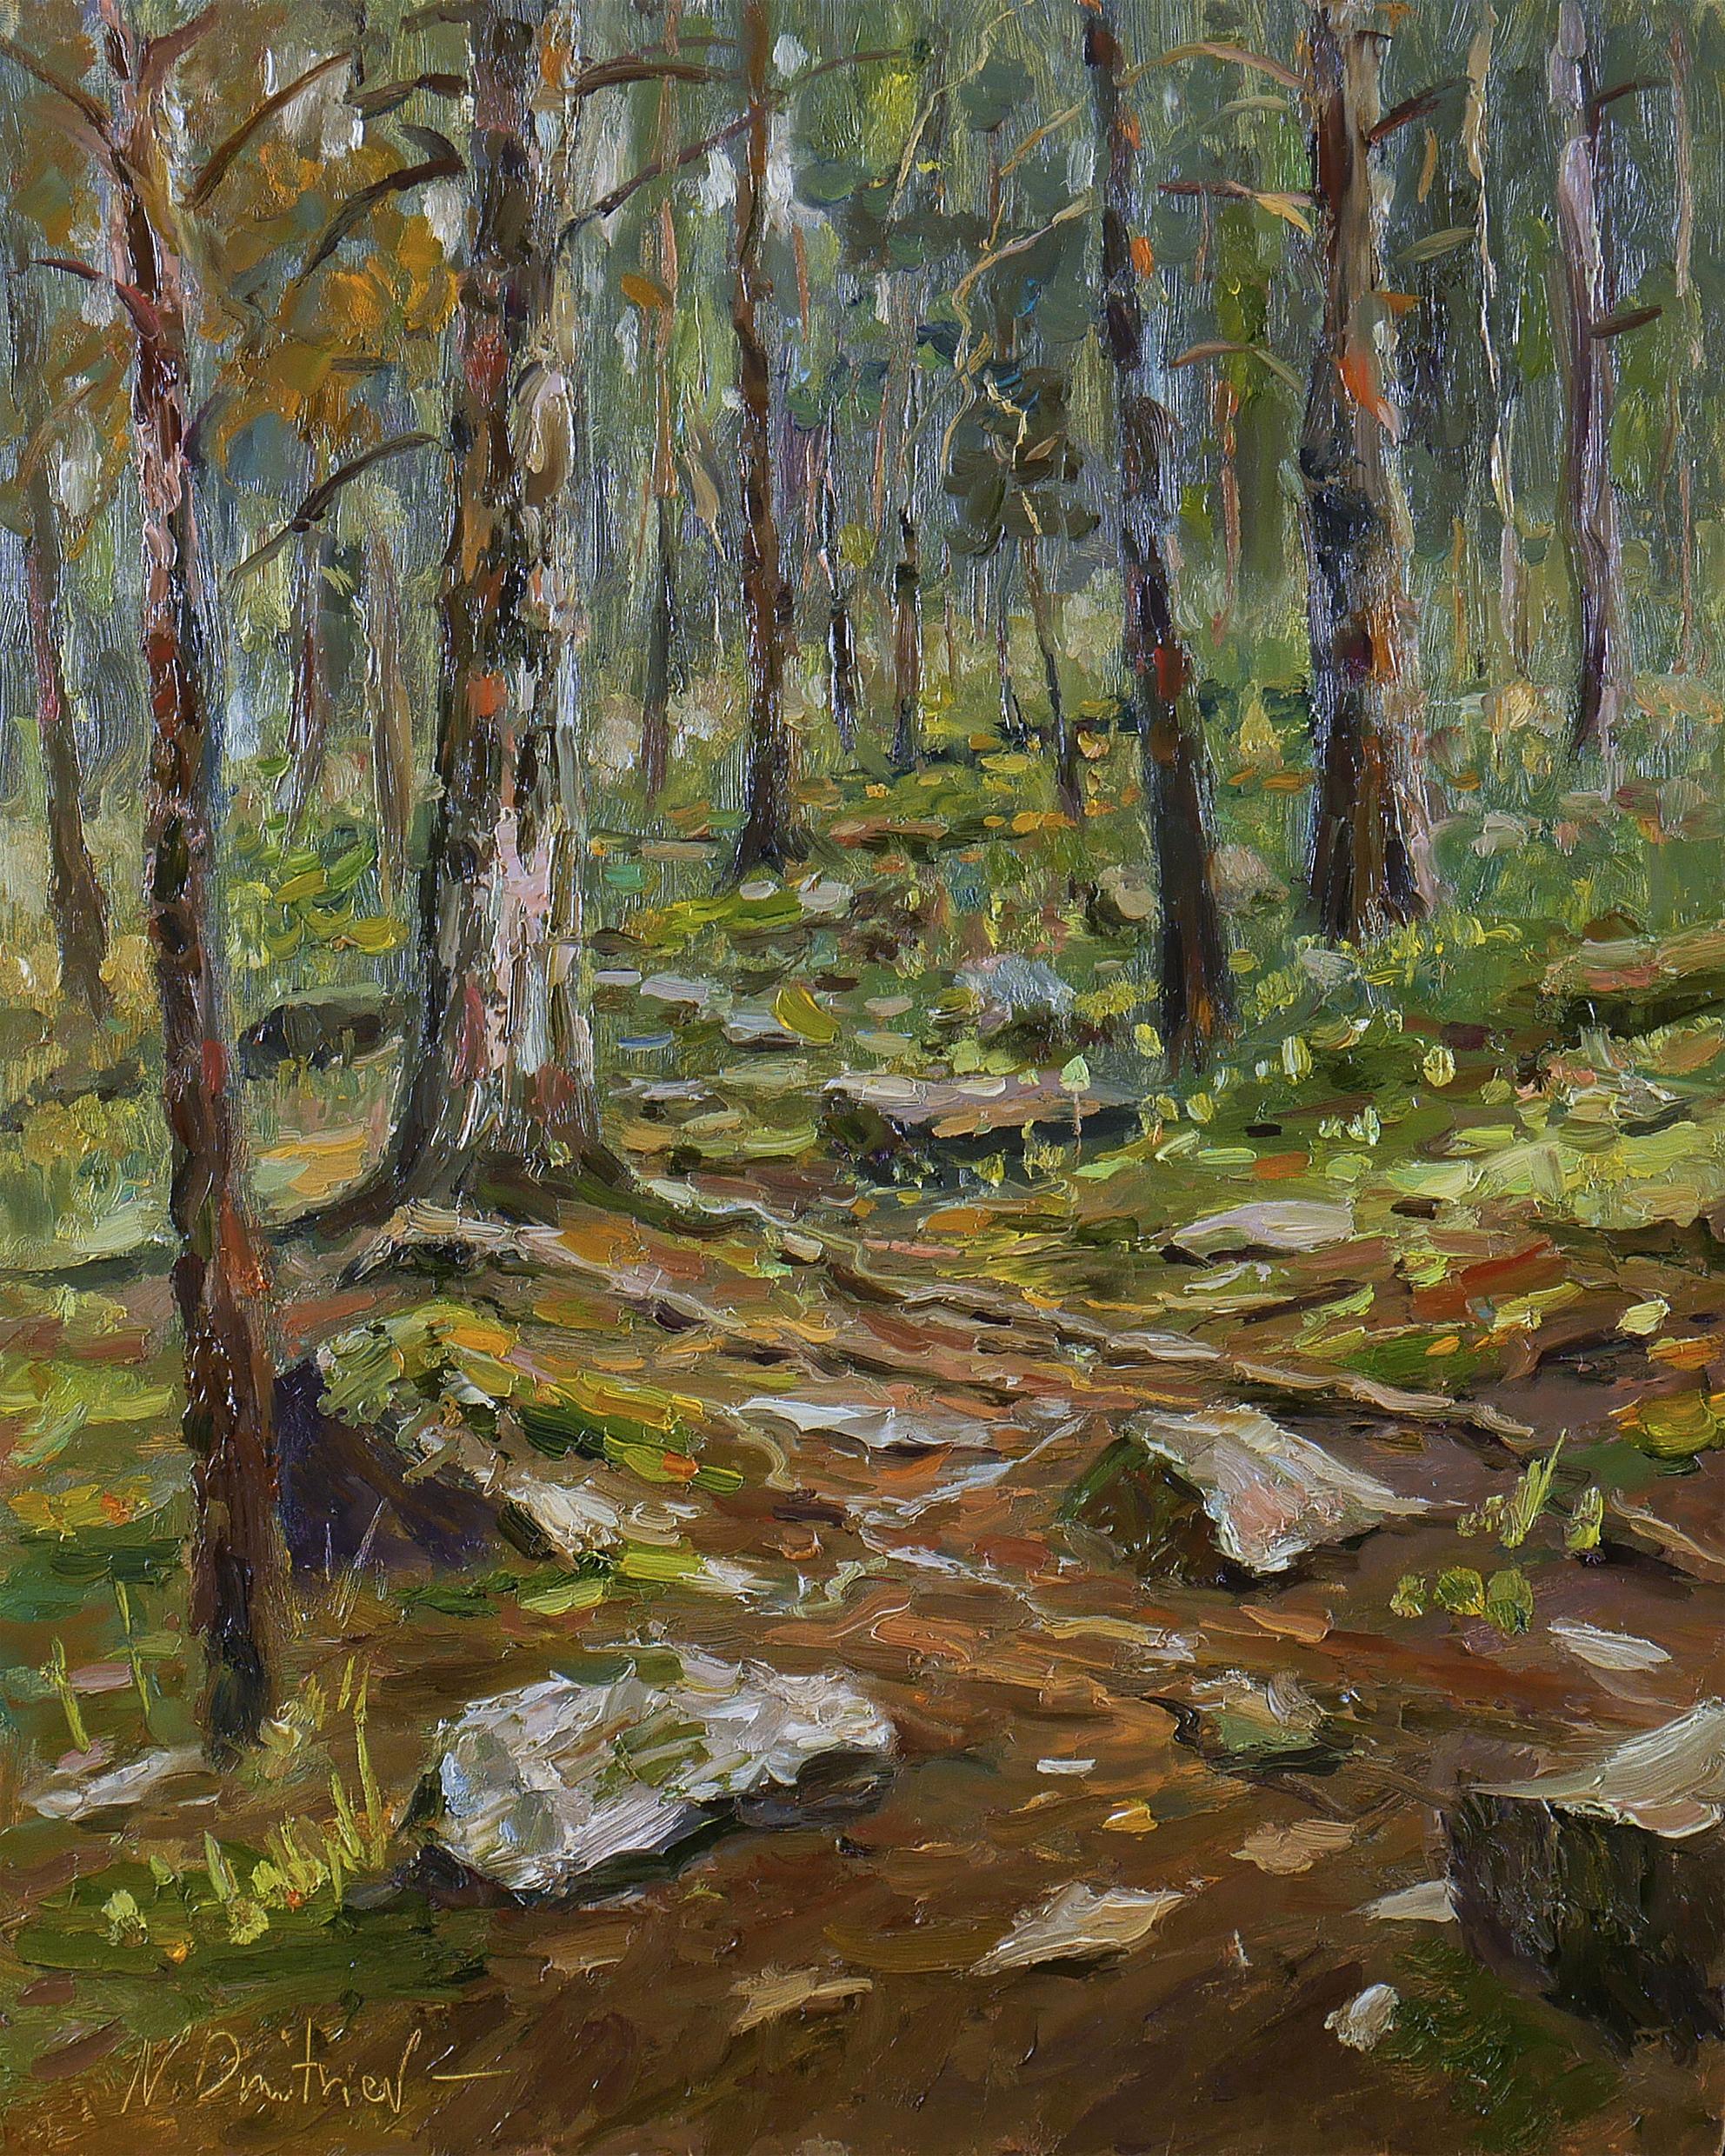 Nikolay Dmitriev Landscape Painting - Forest of stones - forest landscape painting